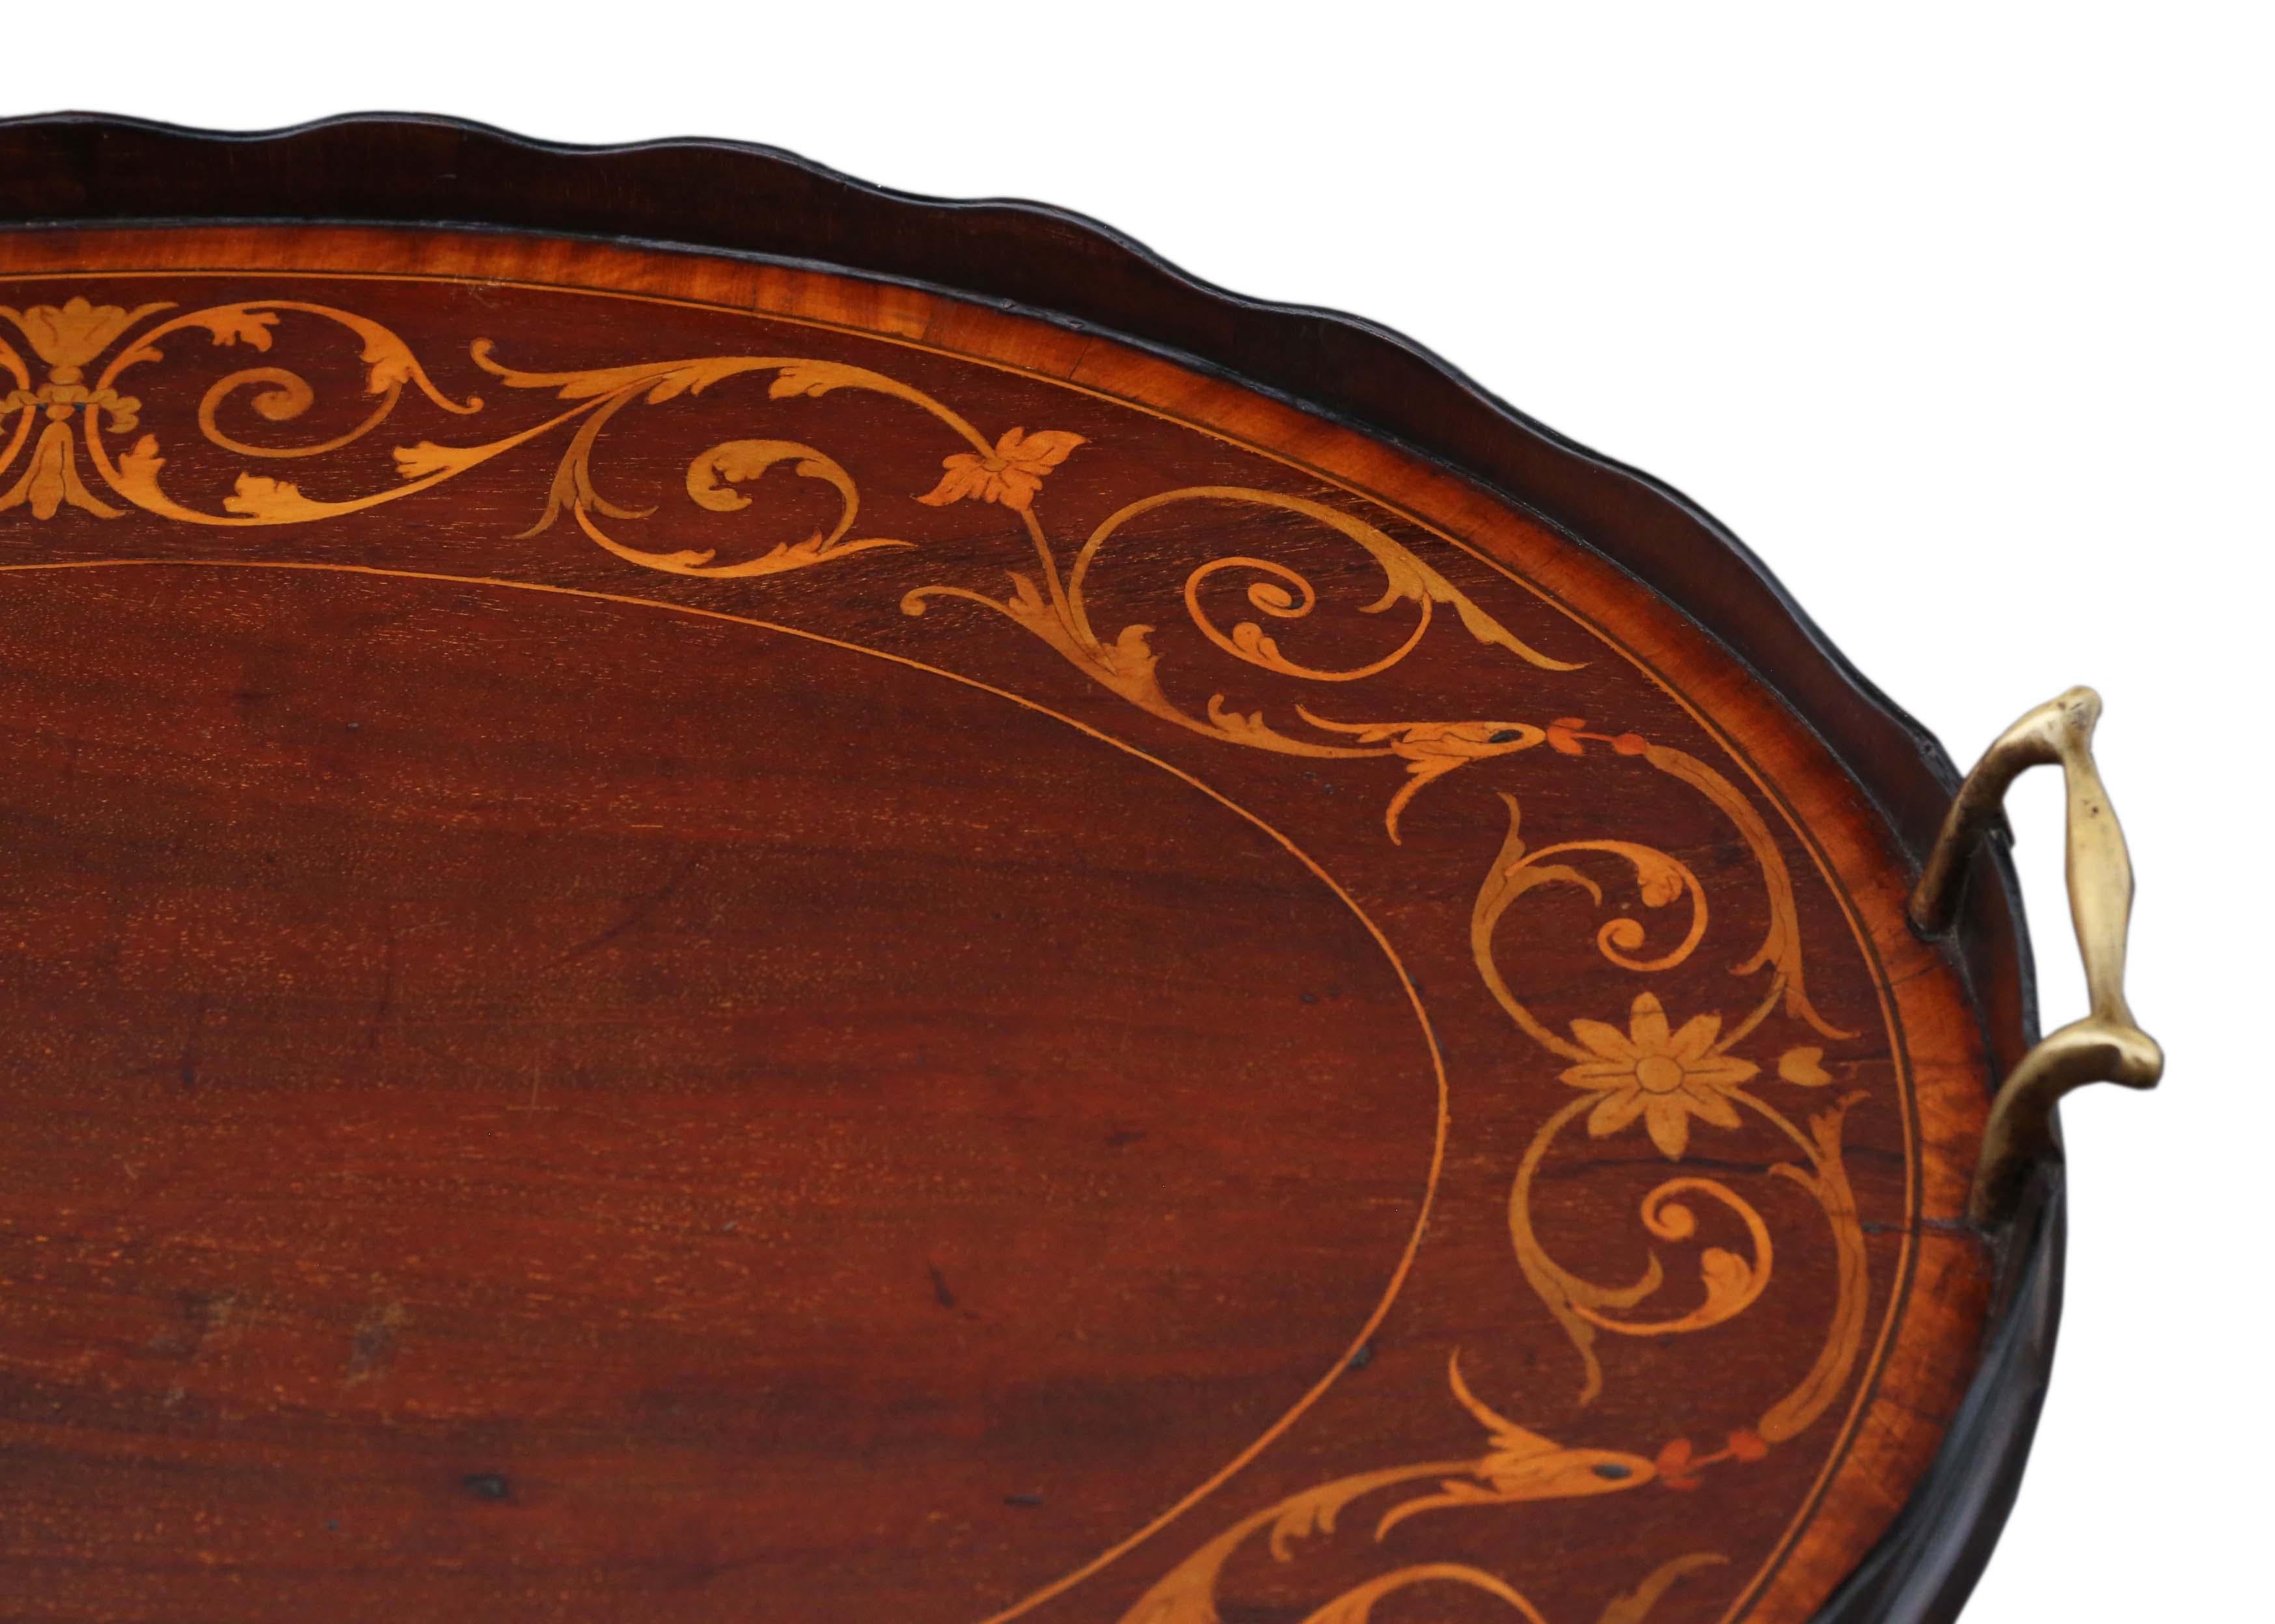 Antique quality 19th century inlaid mahogany oval serving tea tray.

A great quality tray with brass handles... one of the best examples that we have seen.

Very attractive, with lovely proportions and styling.

Desirable oval shape, with